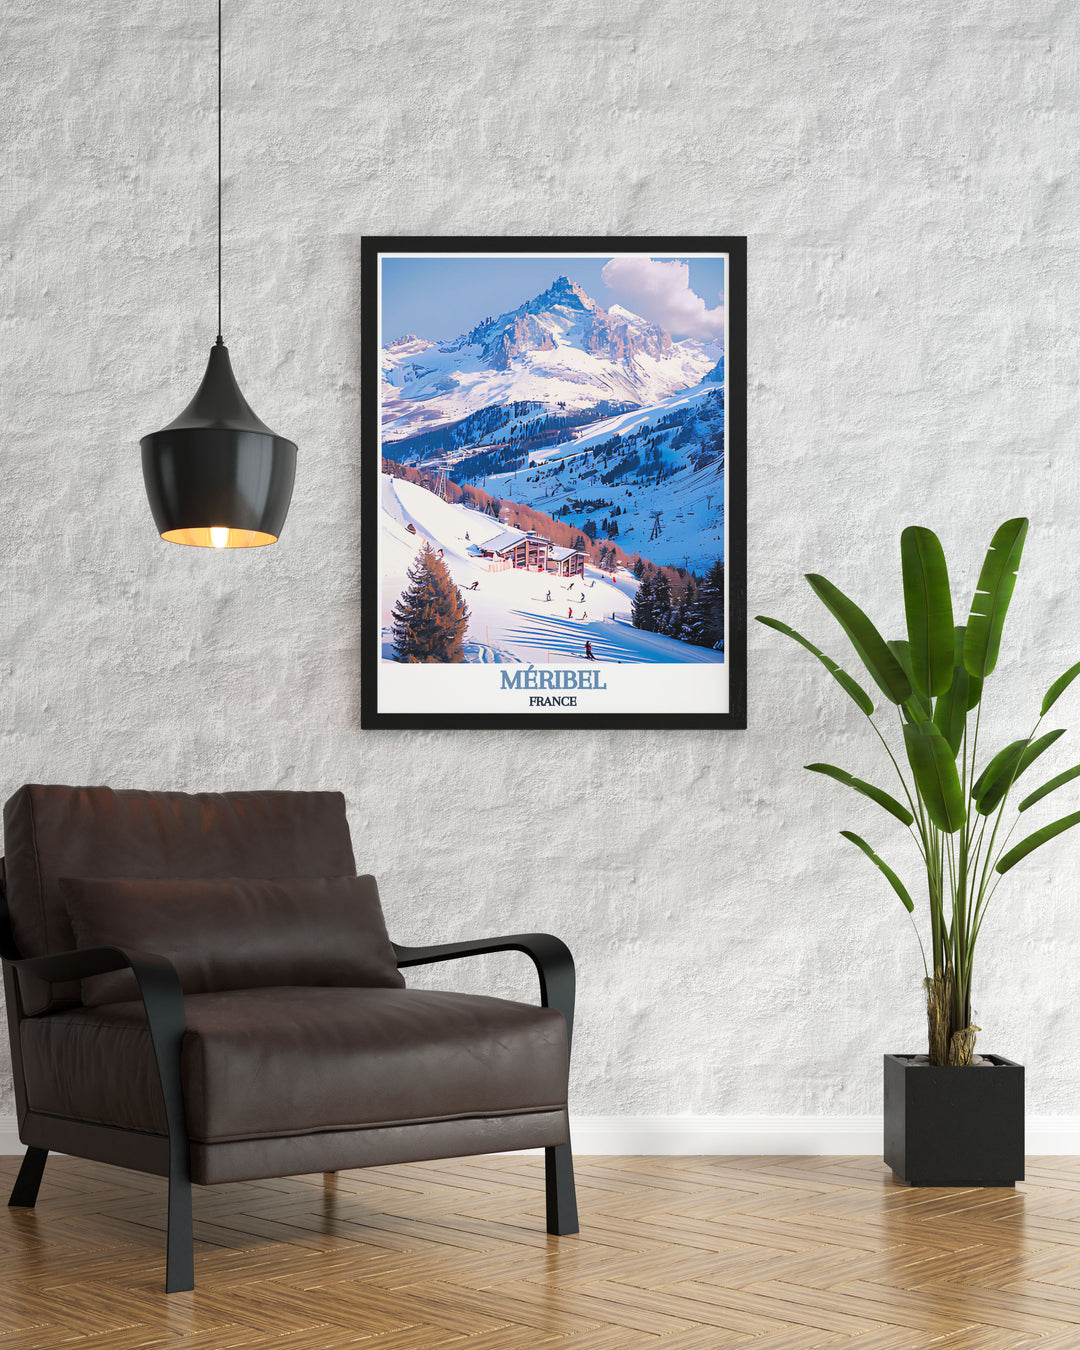 This detailed poster of Méribel illustrates the vibrant snowboarding culture and well groomed trails, making it an excellent addition to any art collection celebrating winter sports.